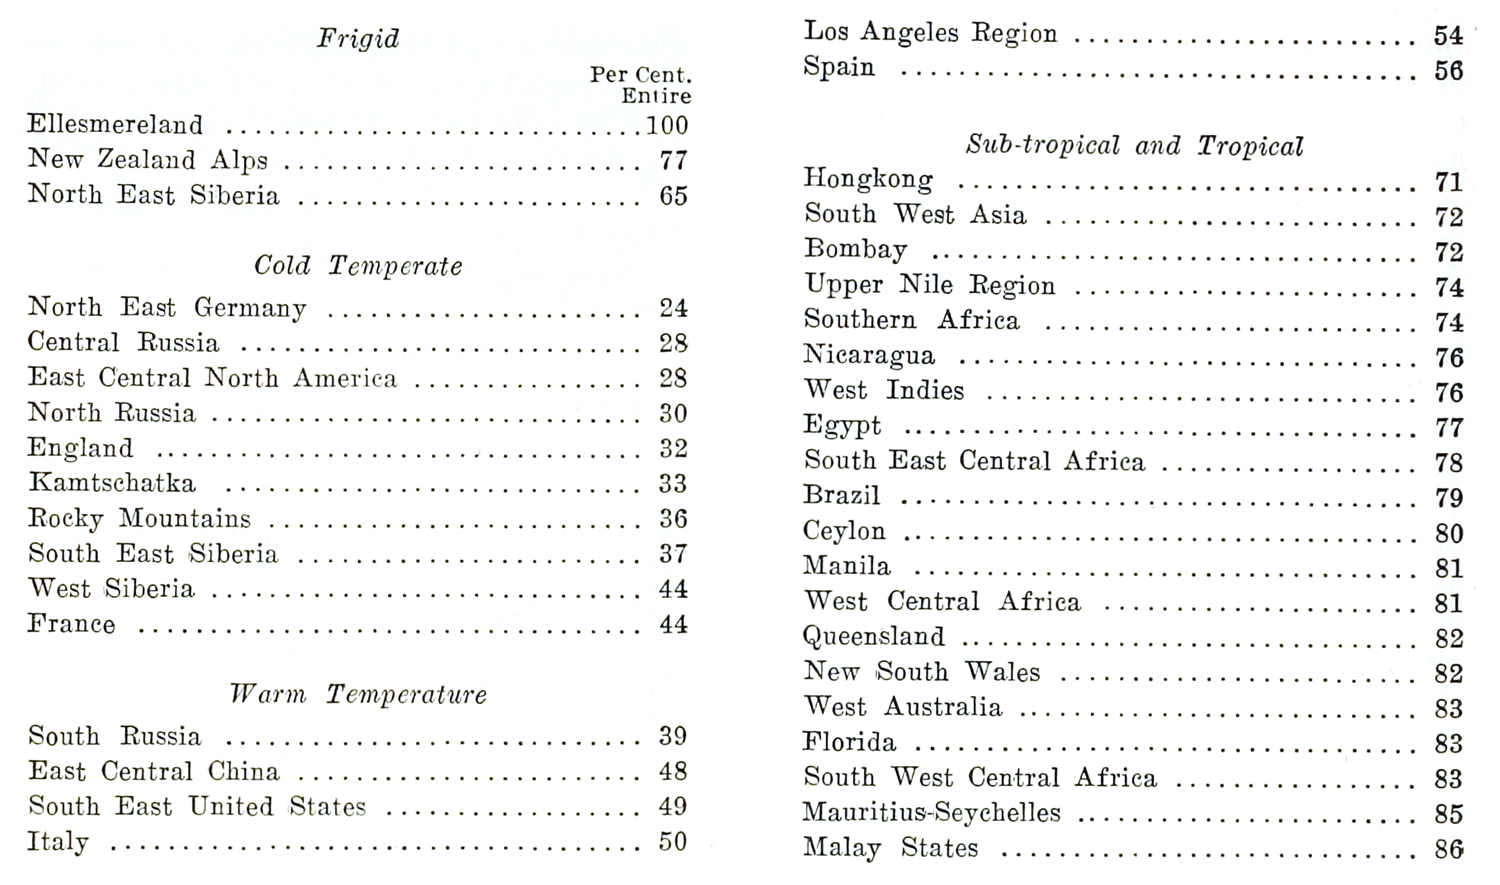 Percent entire-margined woody dicot species in modern floras from Bailey & Sinnott (1915). The table above shows the percent entire-margined woody dicot species in global floras, separated into broad categories. Note that as climate gets warmer moving from cold temperate (24%–44%), to warm temperate (39%–56%), to subtropical/tropical (71%–86%), the percent entire-margined species increases. Frigid floras (65%–100%) do not follow this trend.